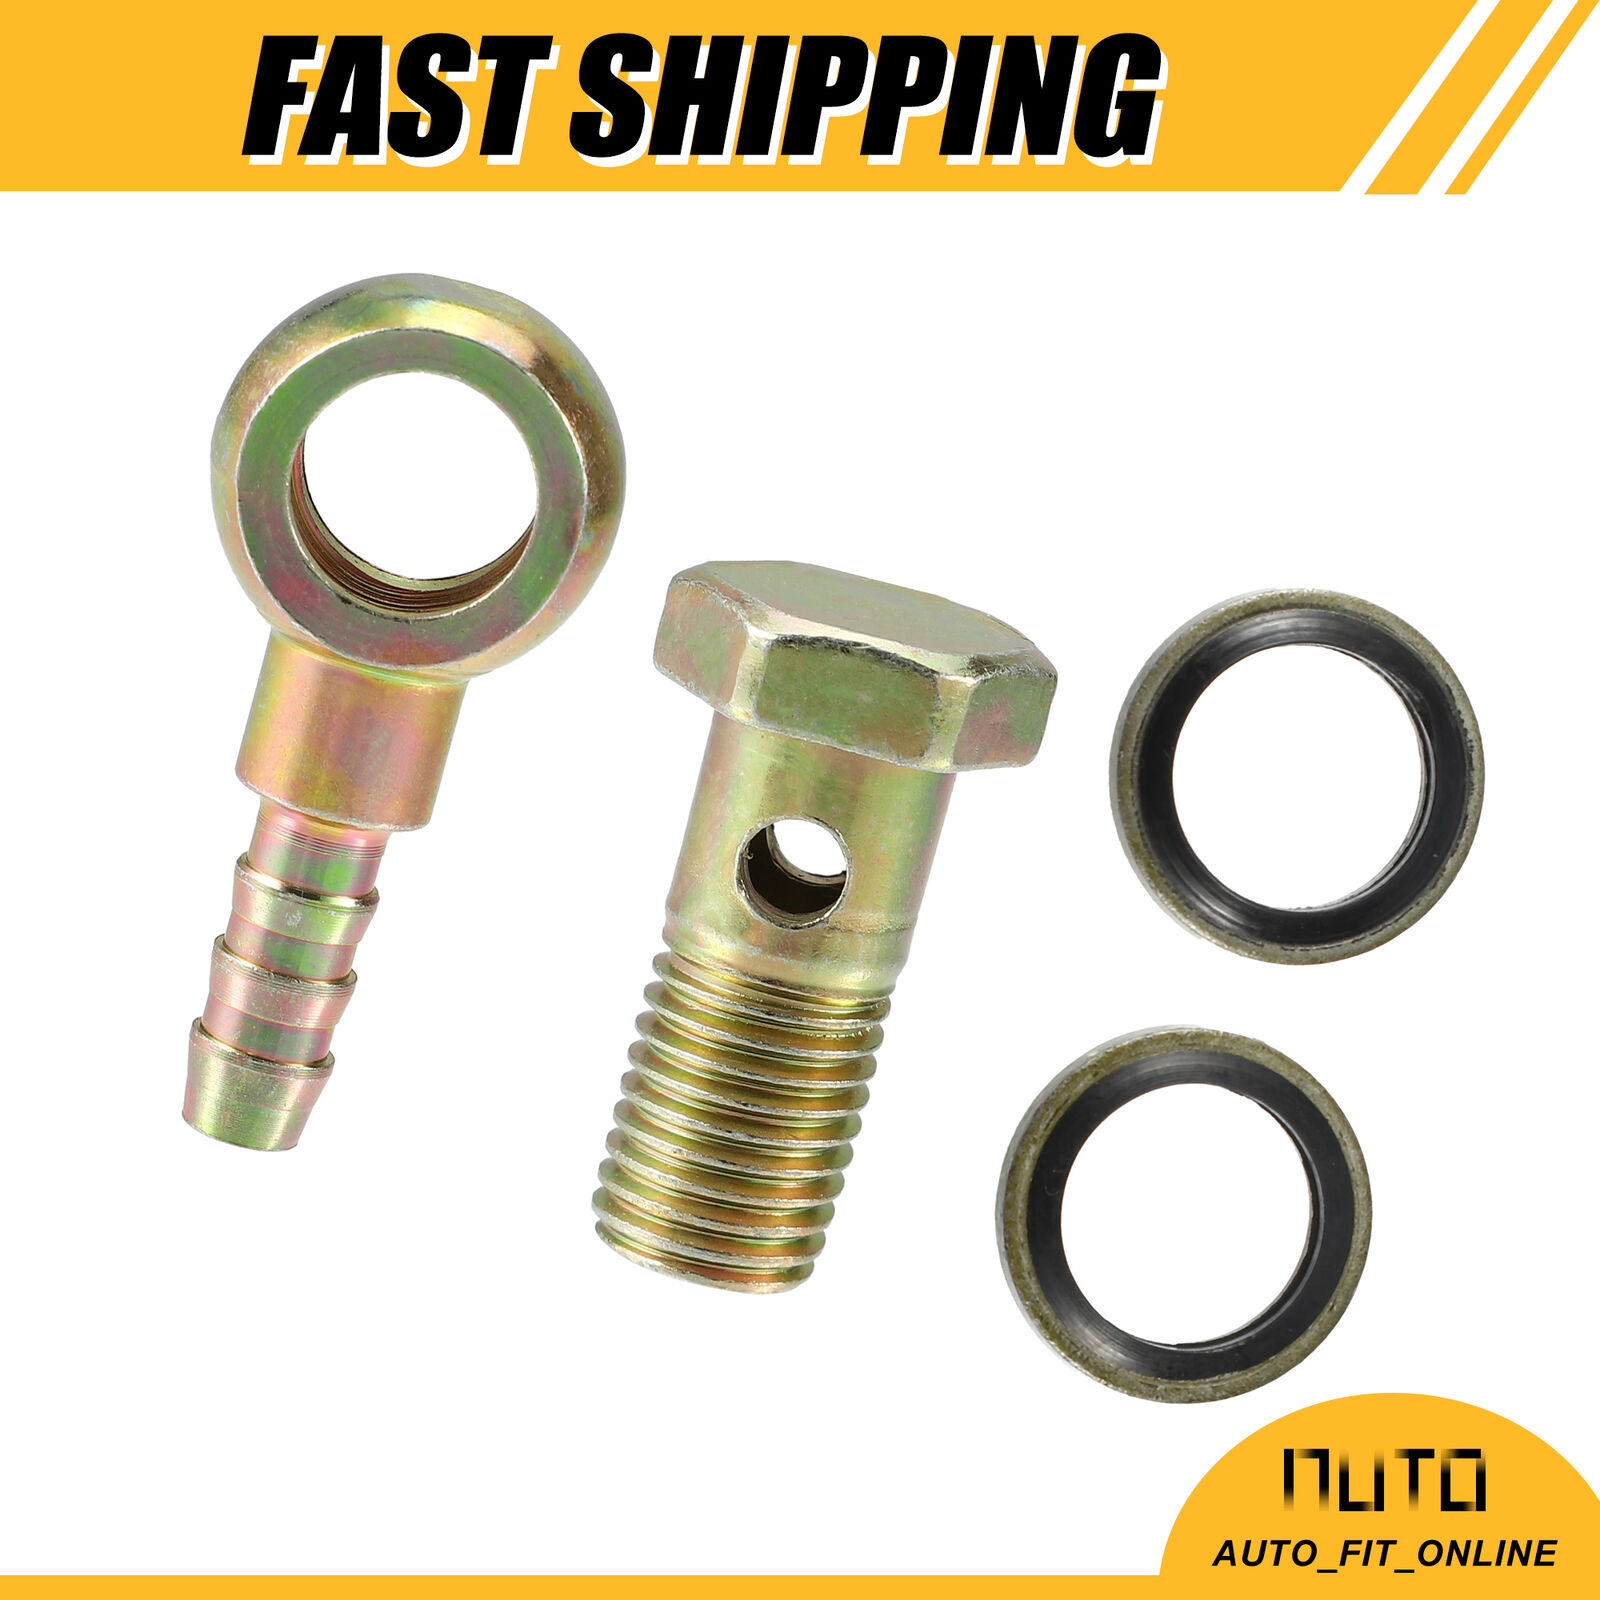 Single Set M12x1.5 Bolt Kit with Copper Washers for Motorcycle Universal